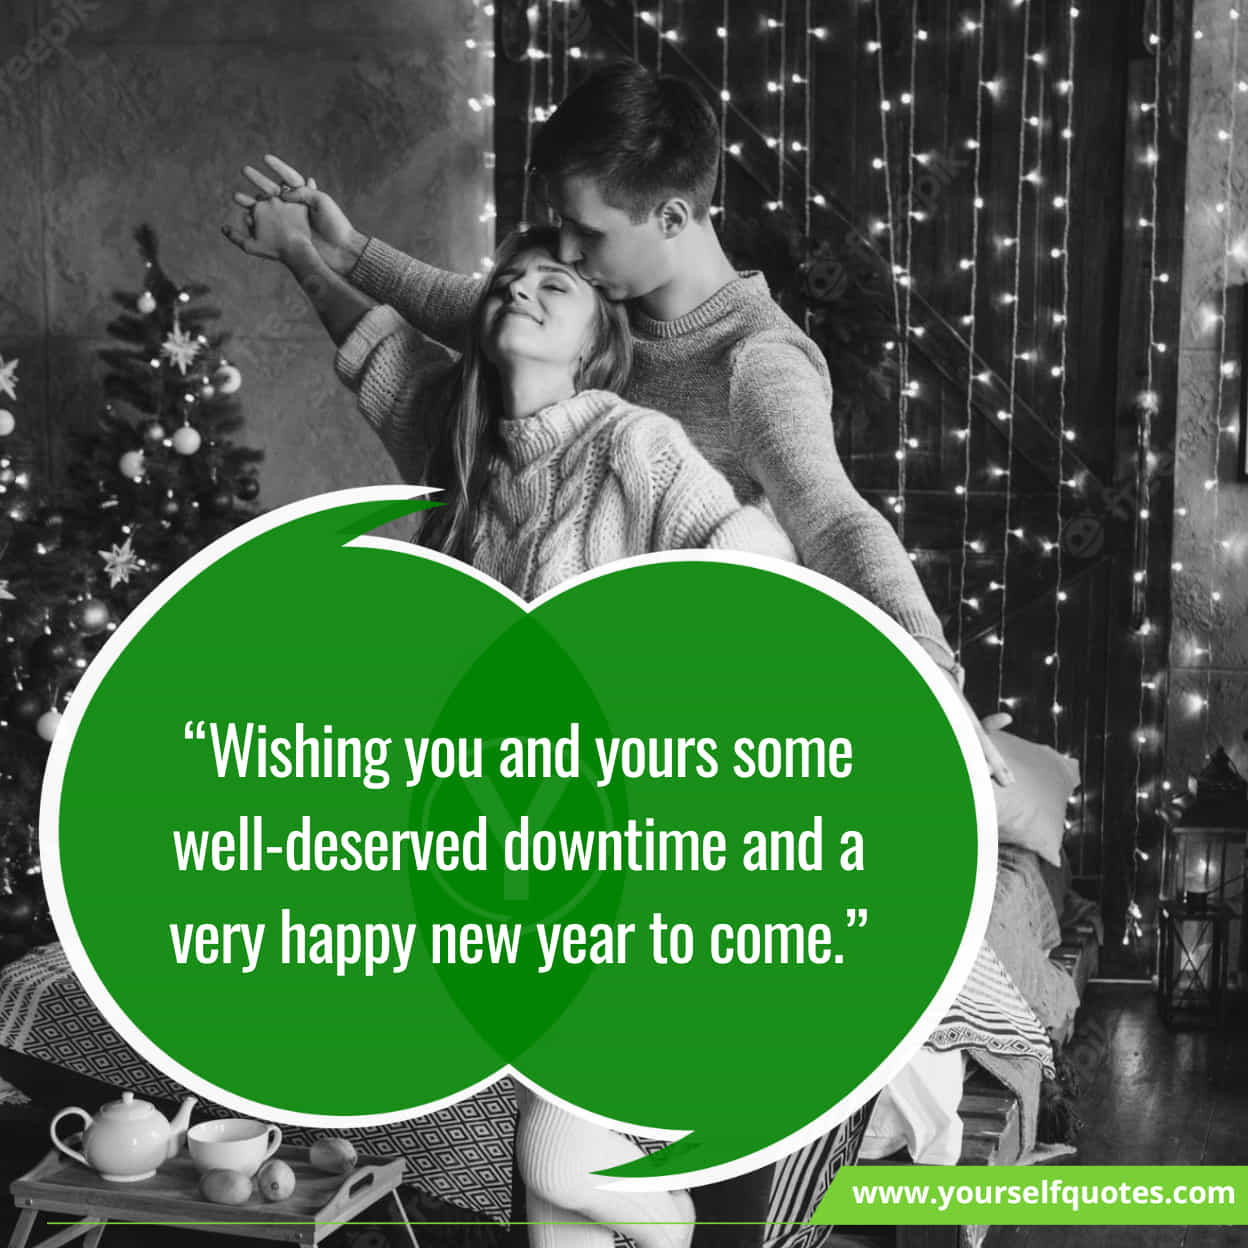 Heartfelt Greeting For Love On New Year